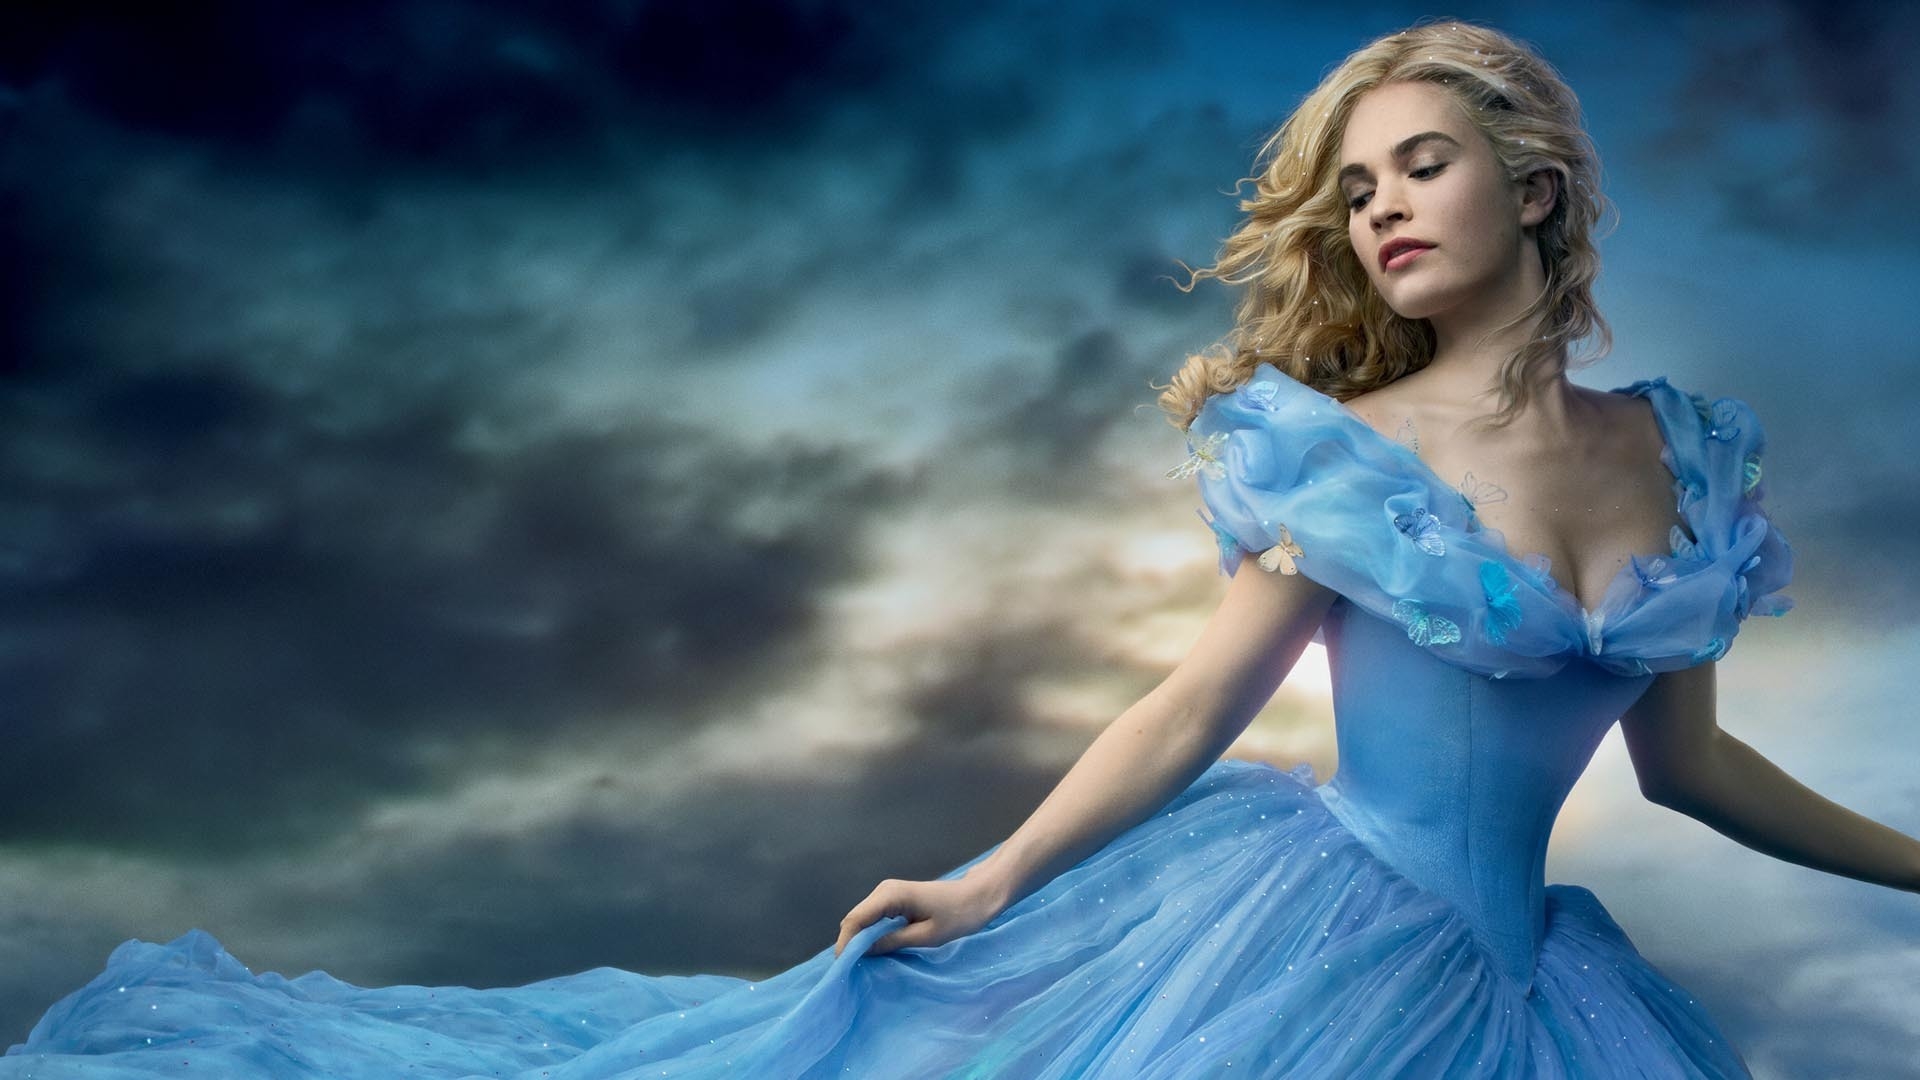 Cinderella Wallpaper From The Movie